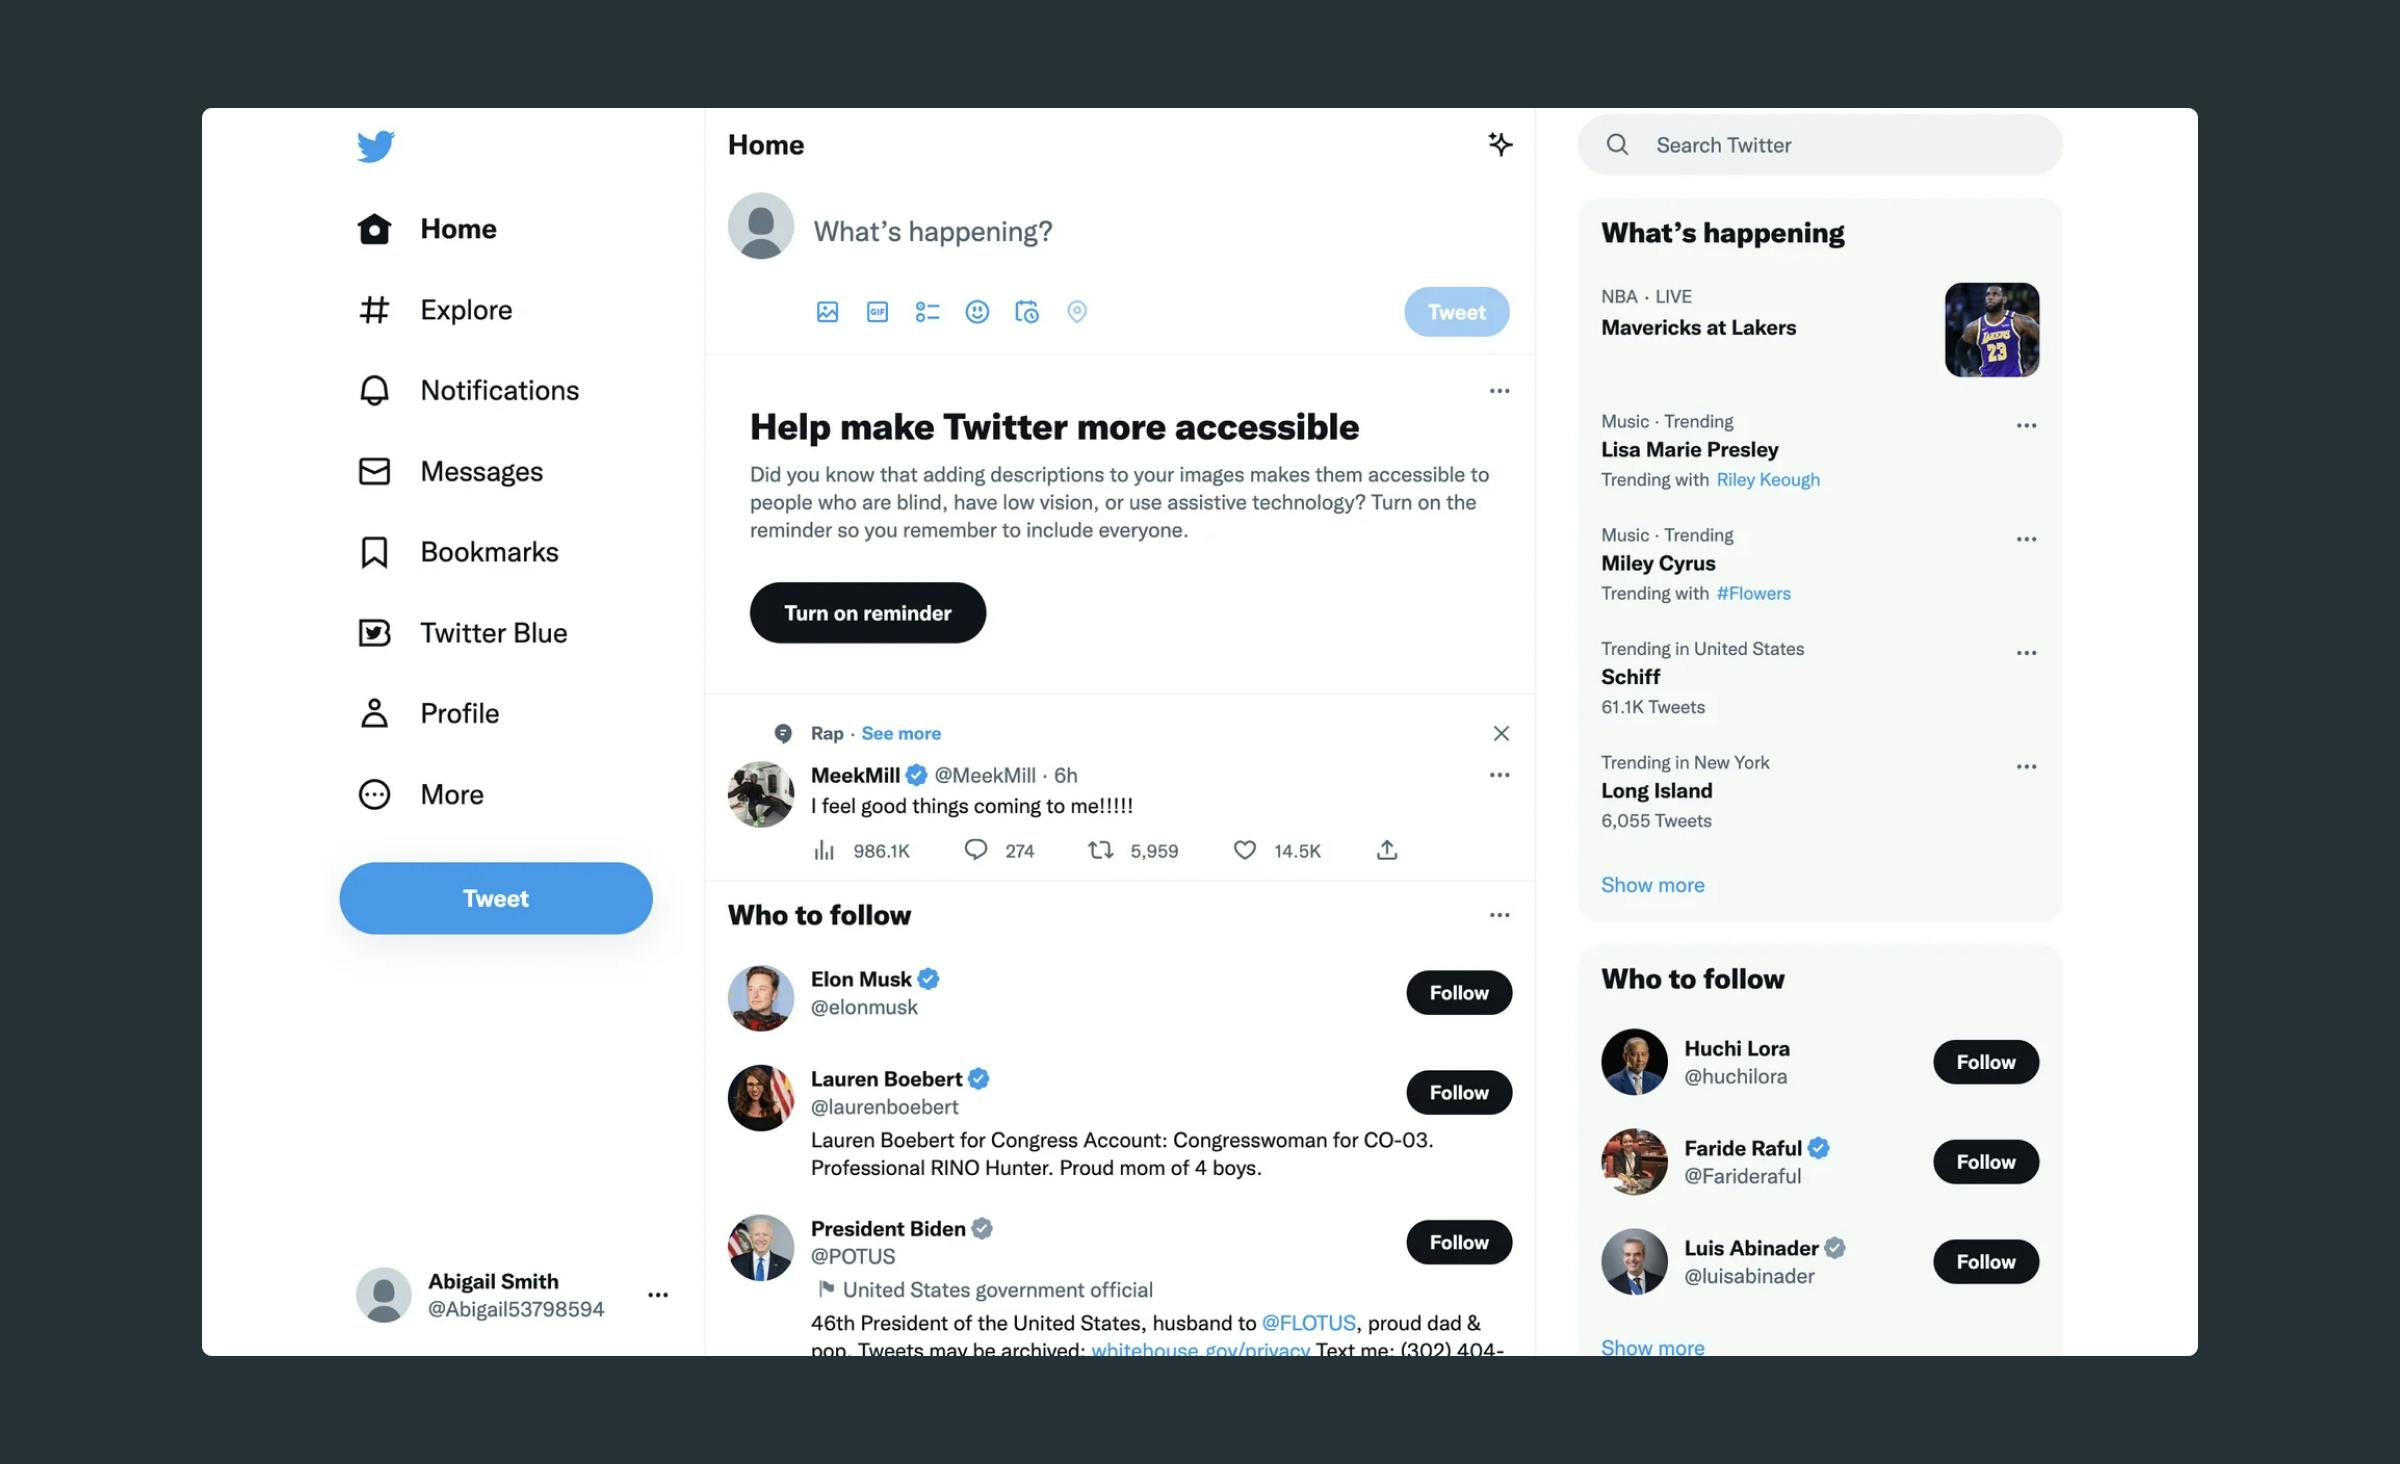 How to build a social media website: Twitter UI design is a perfect example of how the social media website UI should look like